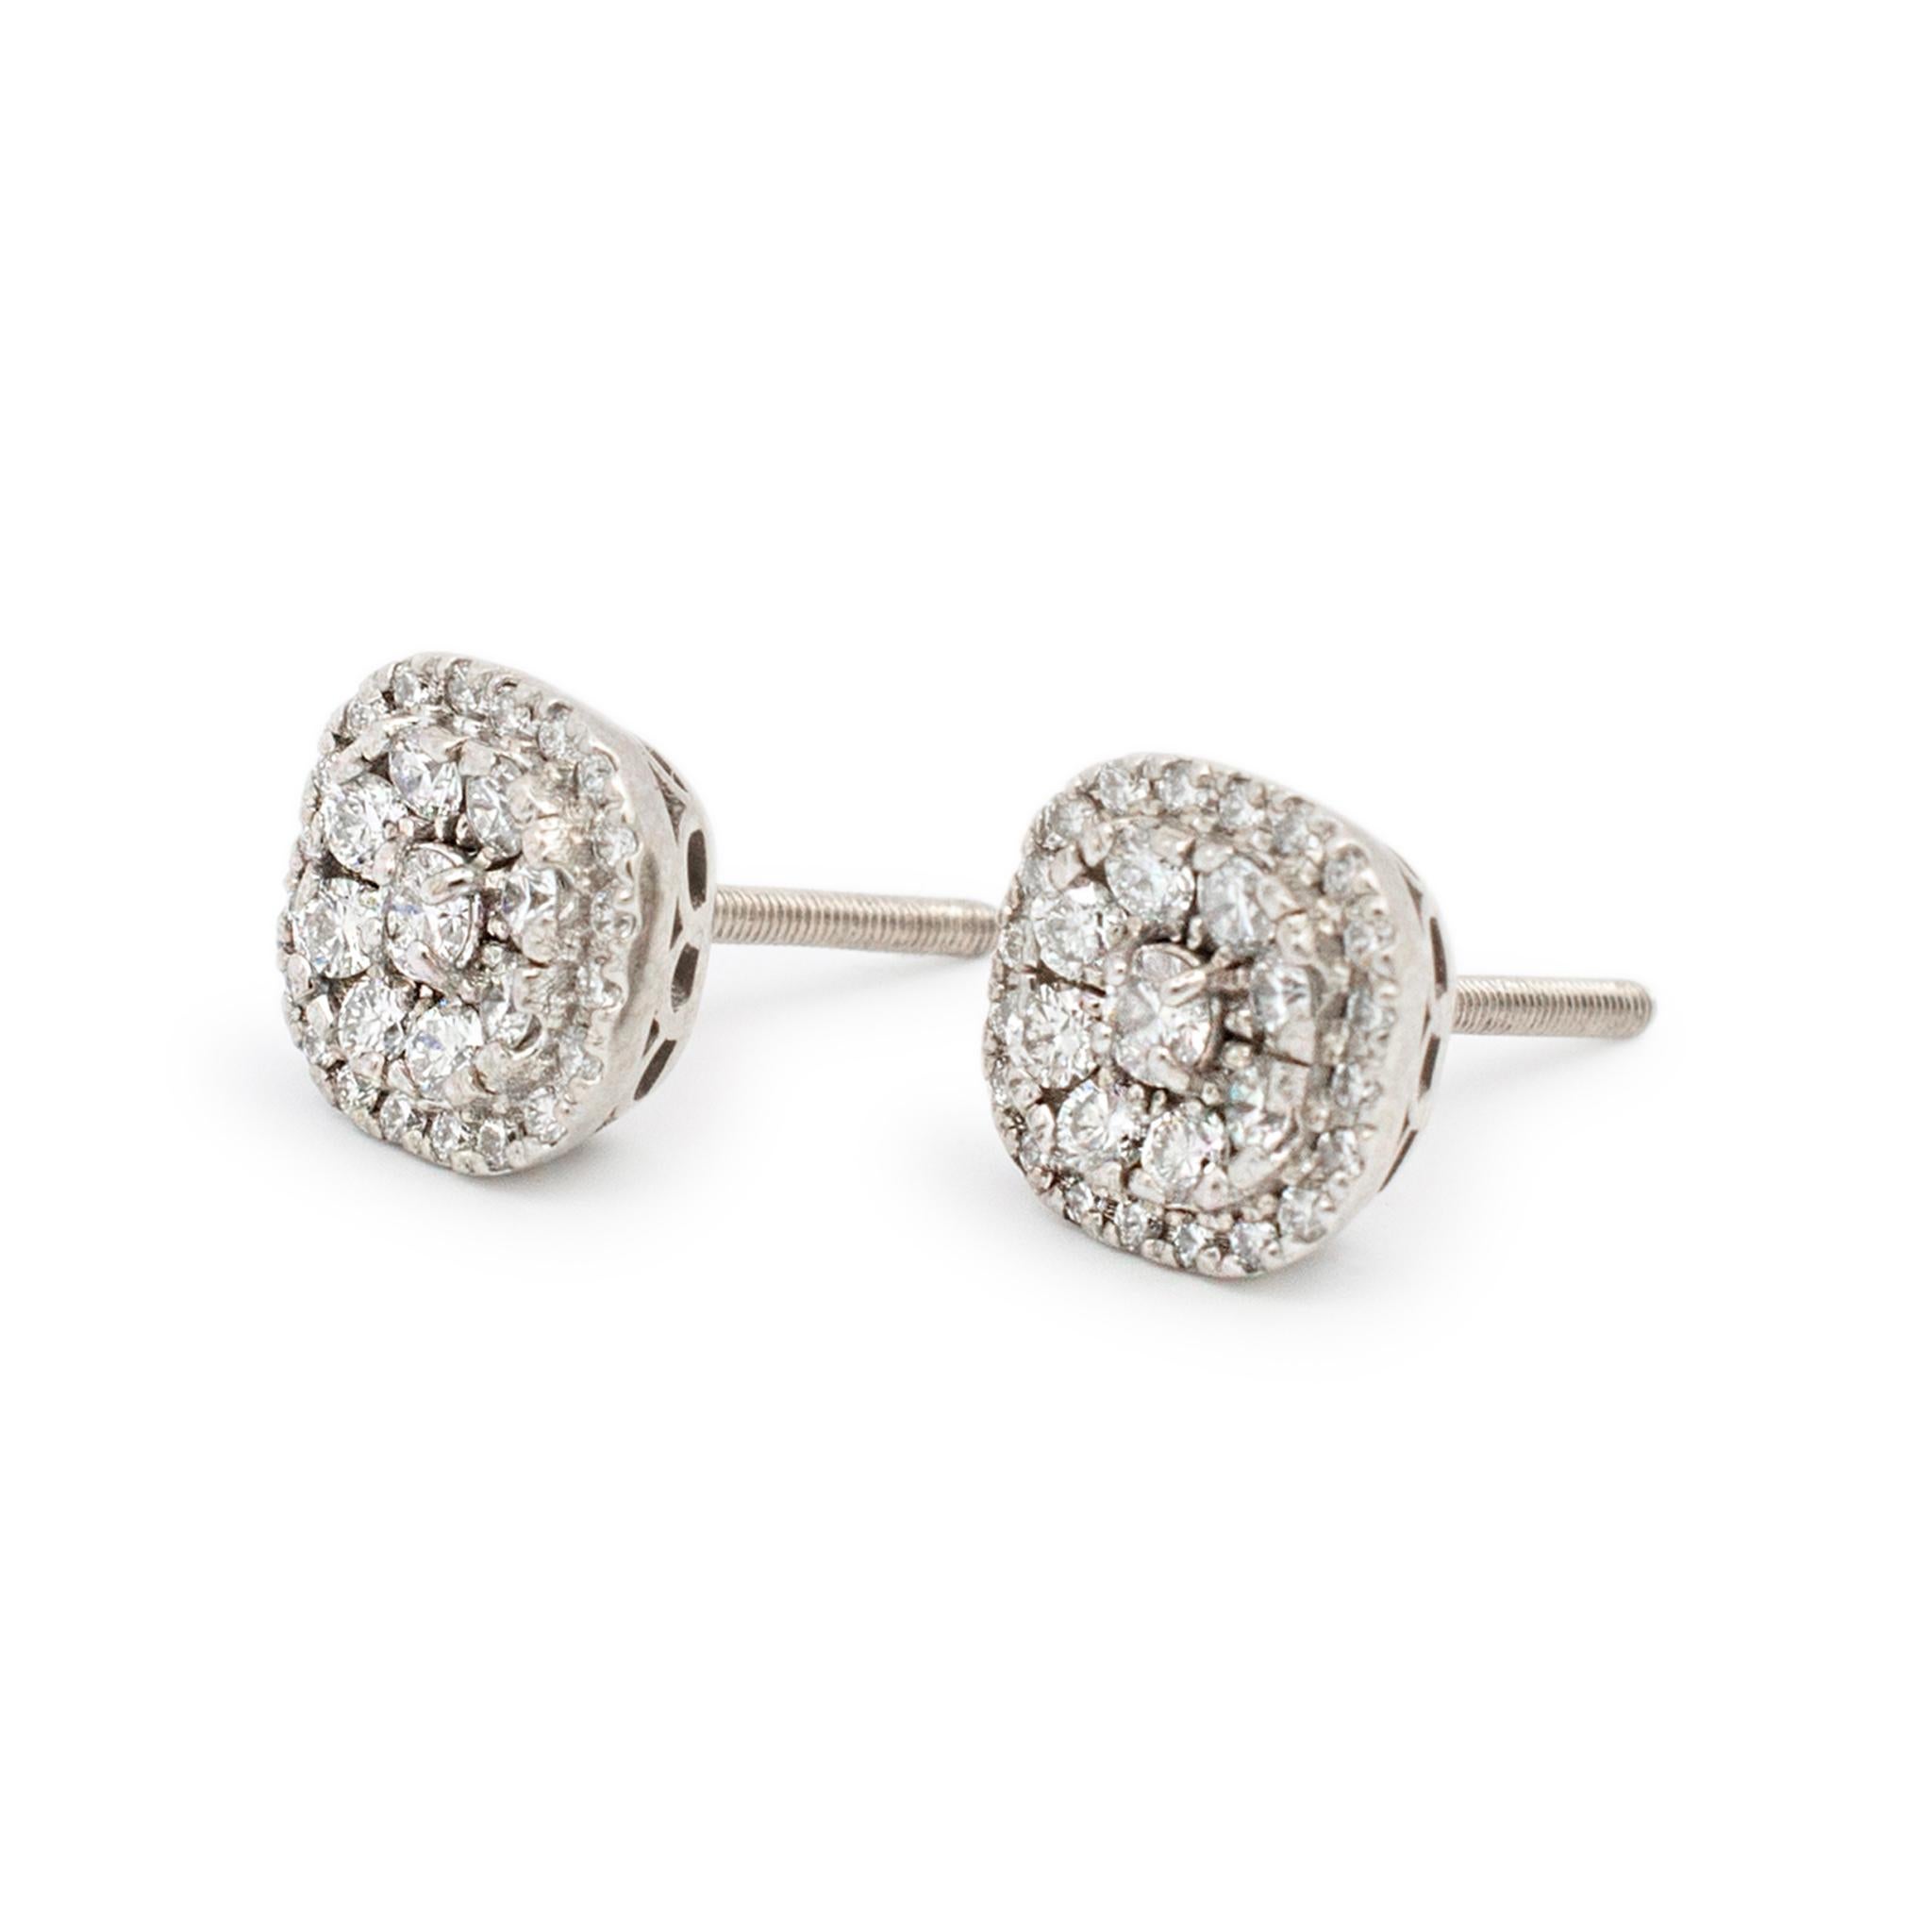 Gender: Ladies

Metal Type: 14K White Gold

Length: 0.50 inches

Width: 9.15 mm

Weight: 3.04 grams

14K White Gold diamond stud earrings with screw backs. The metal was tested and determined to be 14K white gold. Engraved with 